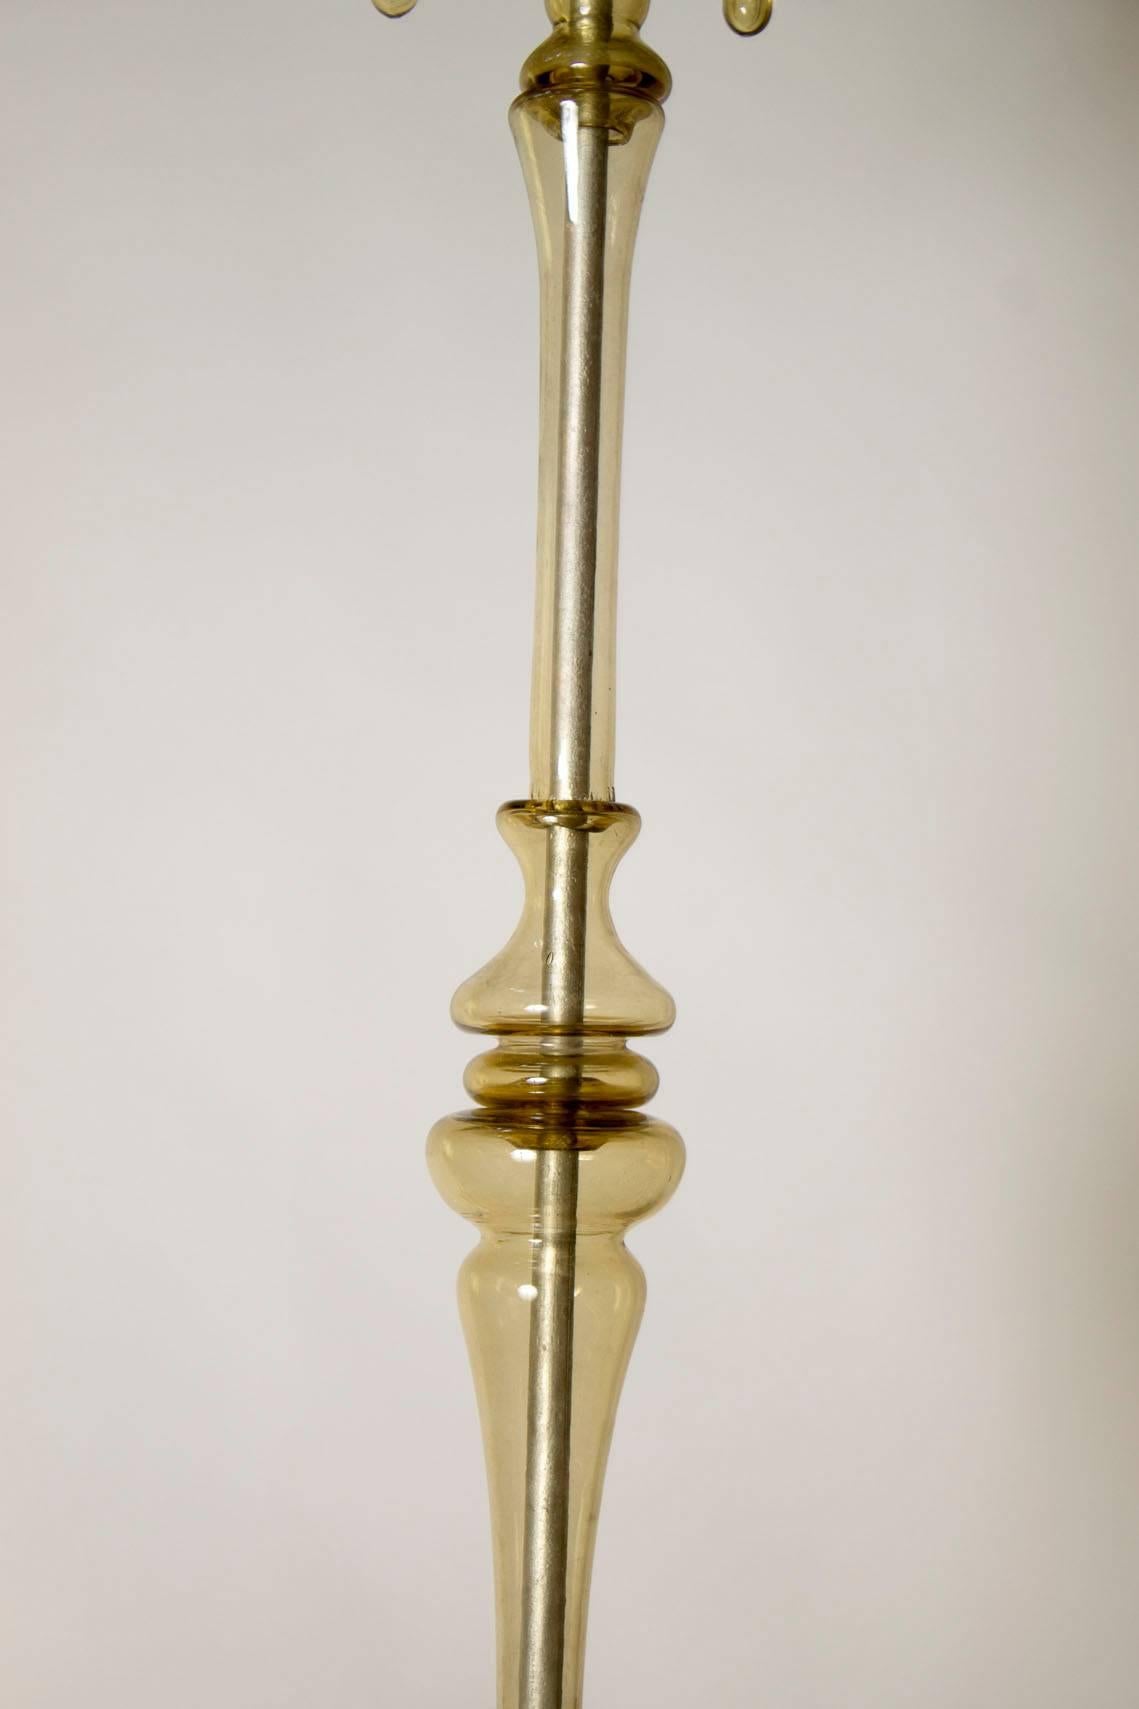 A traditional amber Murano glass chandelier by Venini from the 1930s. Features 10 arms with glass drops.